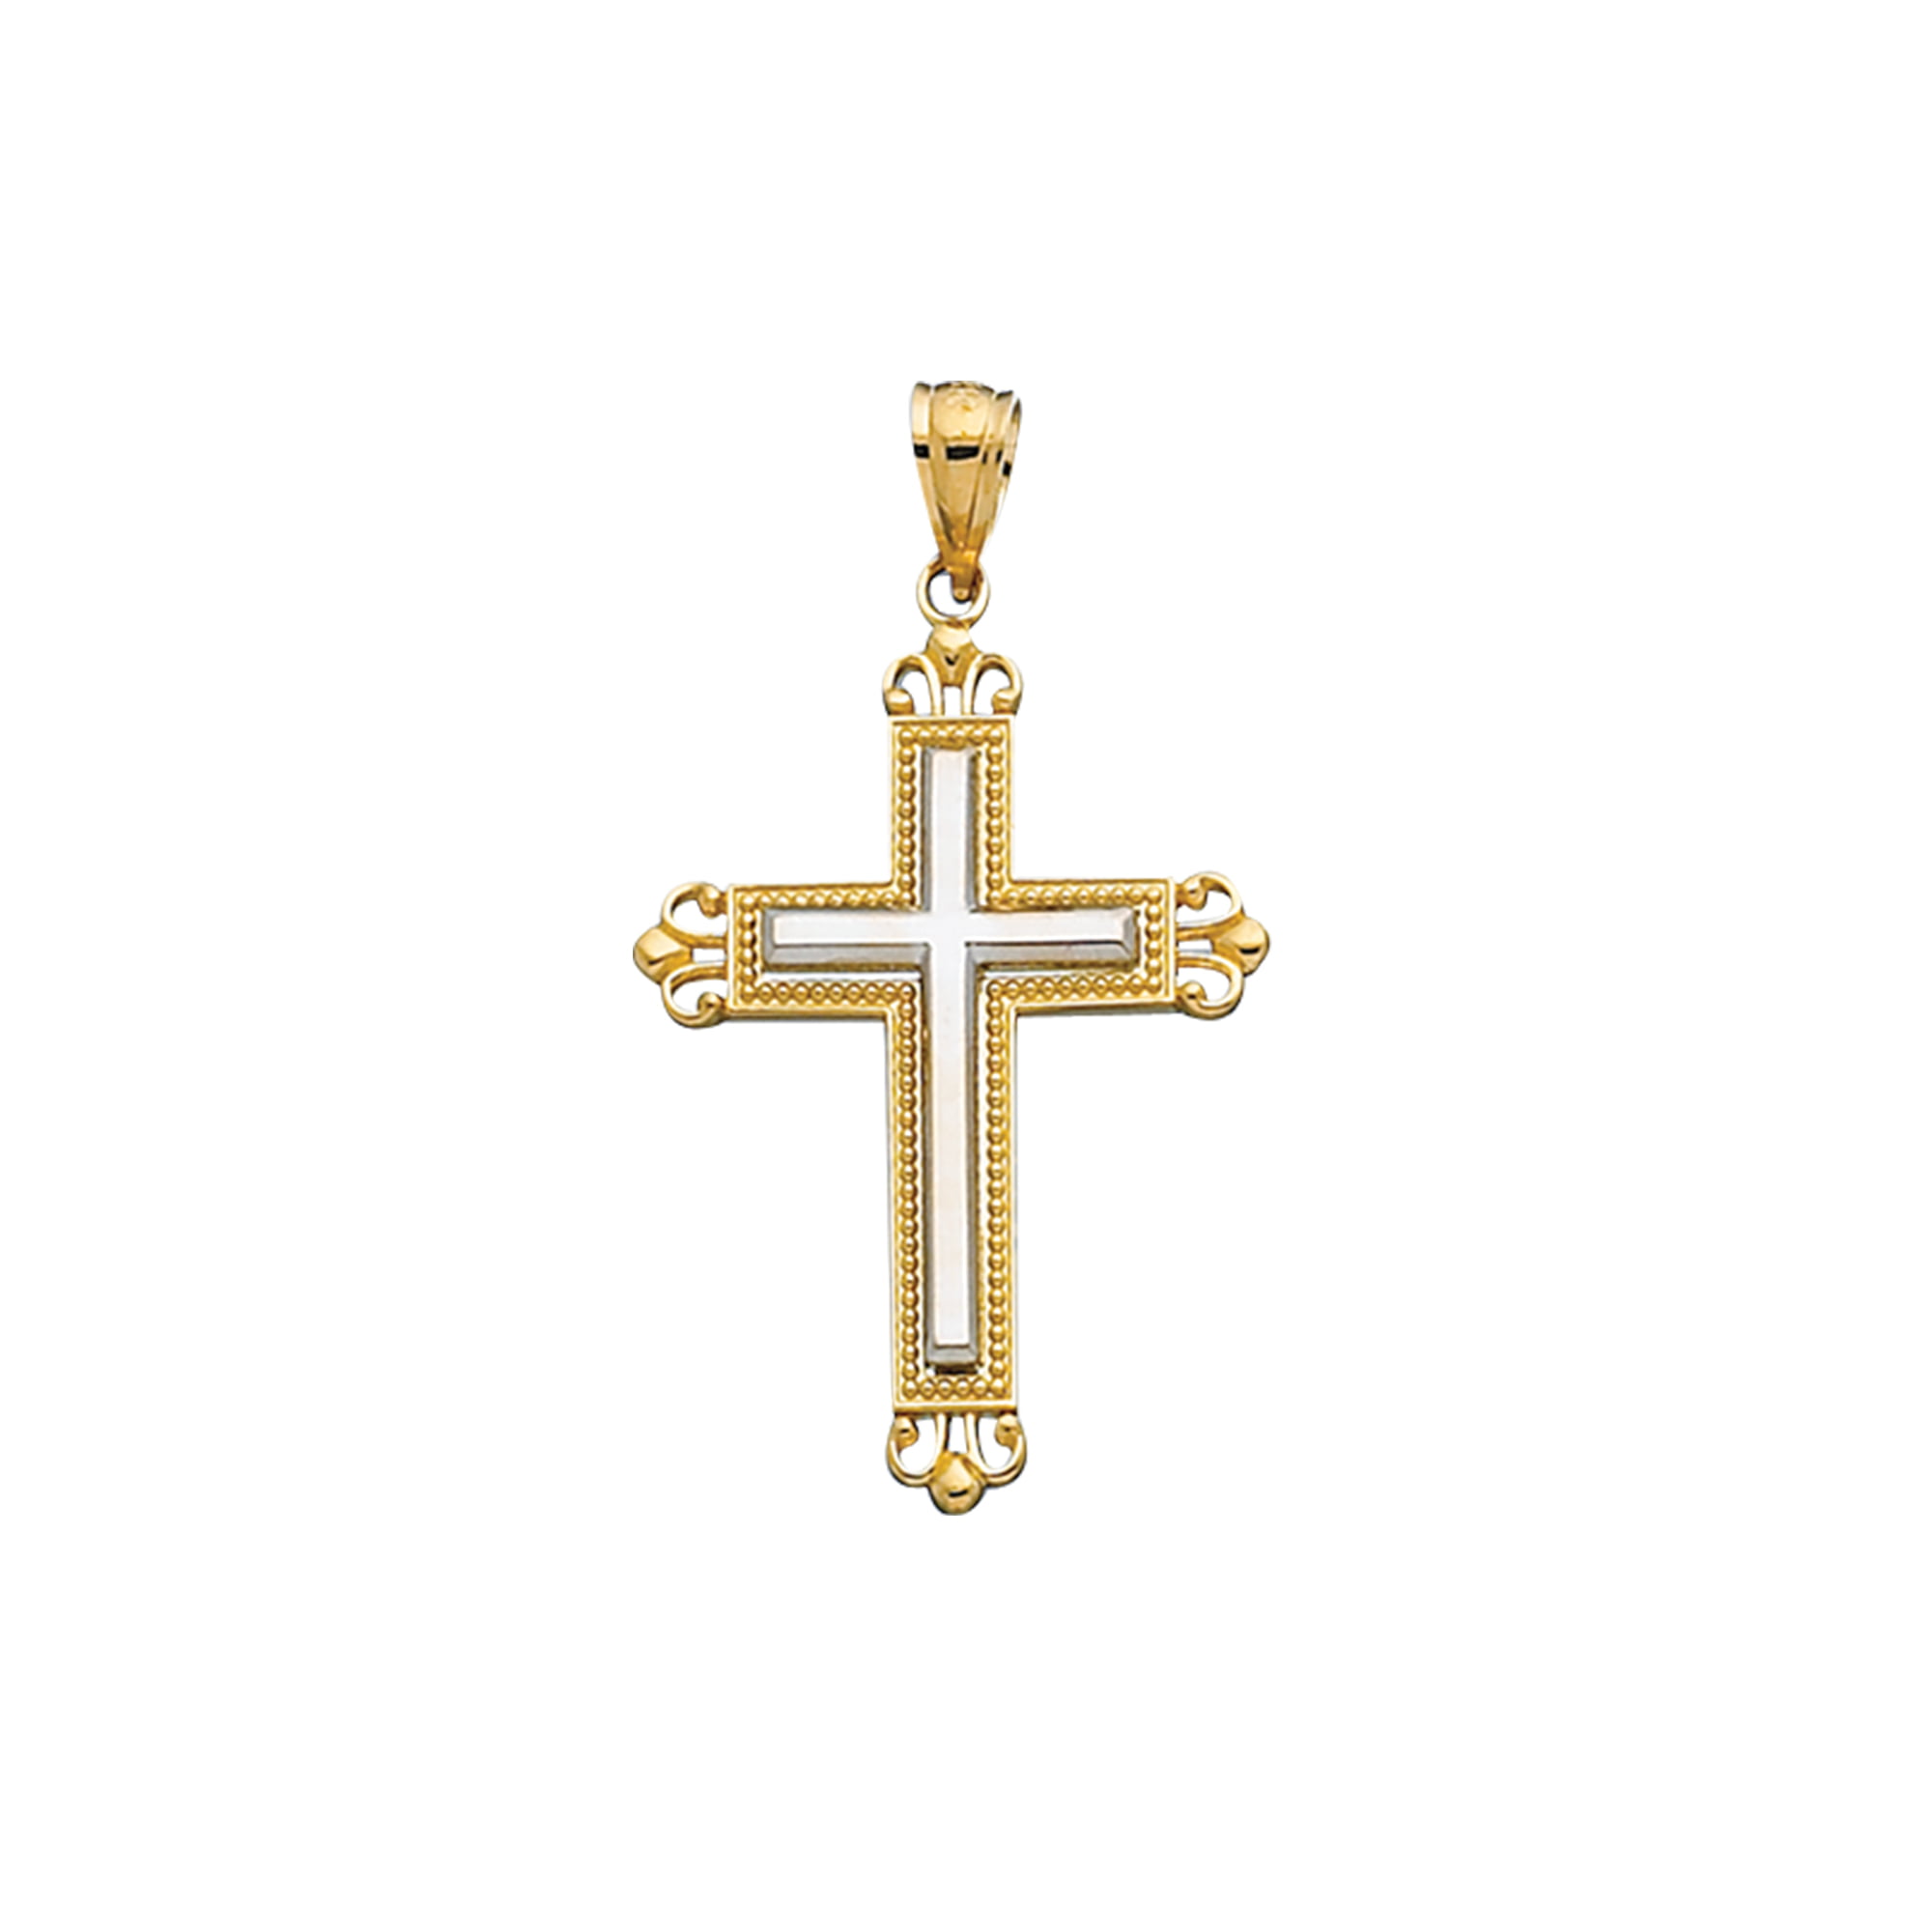 14K Yellow Gold Textured Religious Cross with Filigree Pendant Necklace 